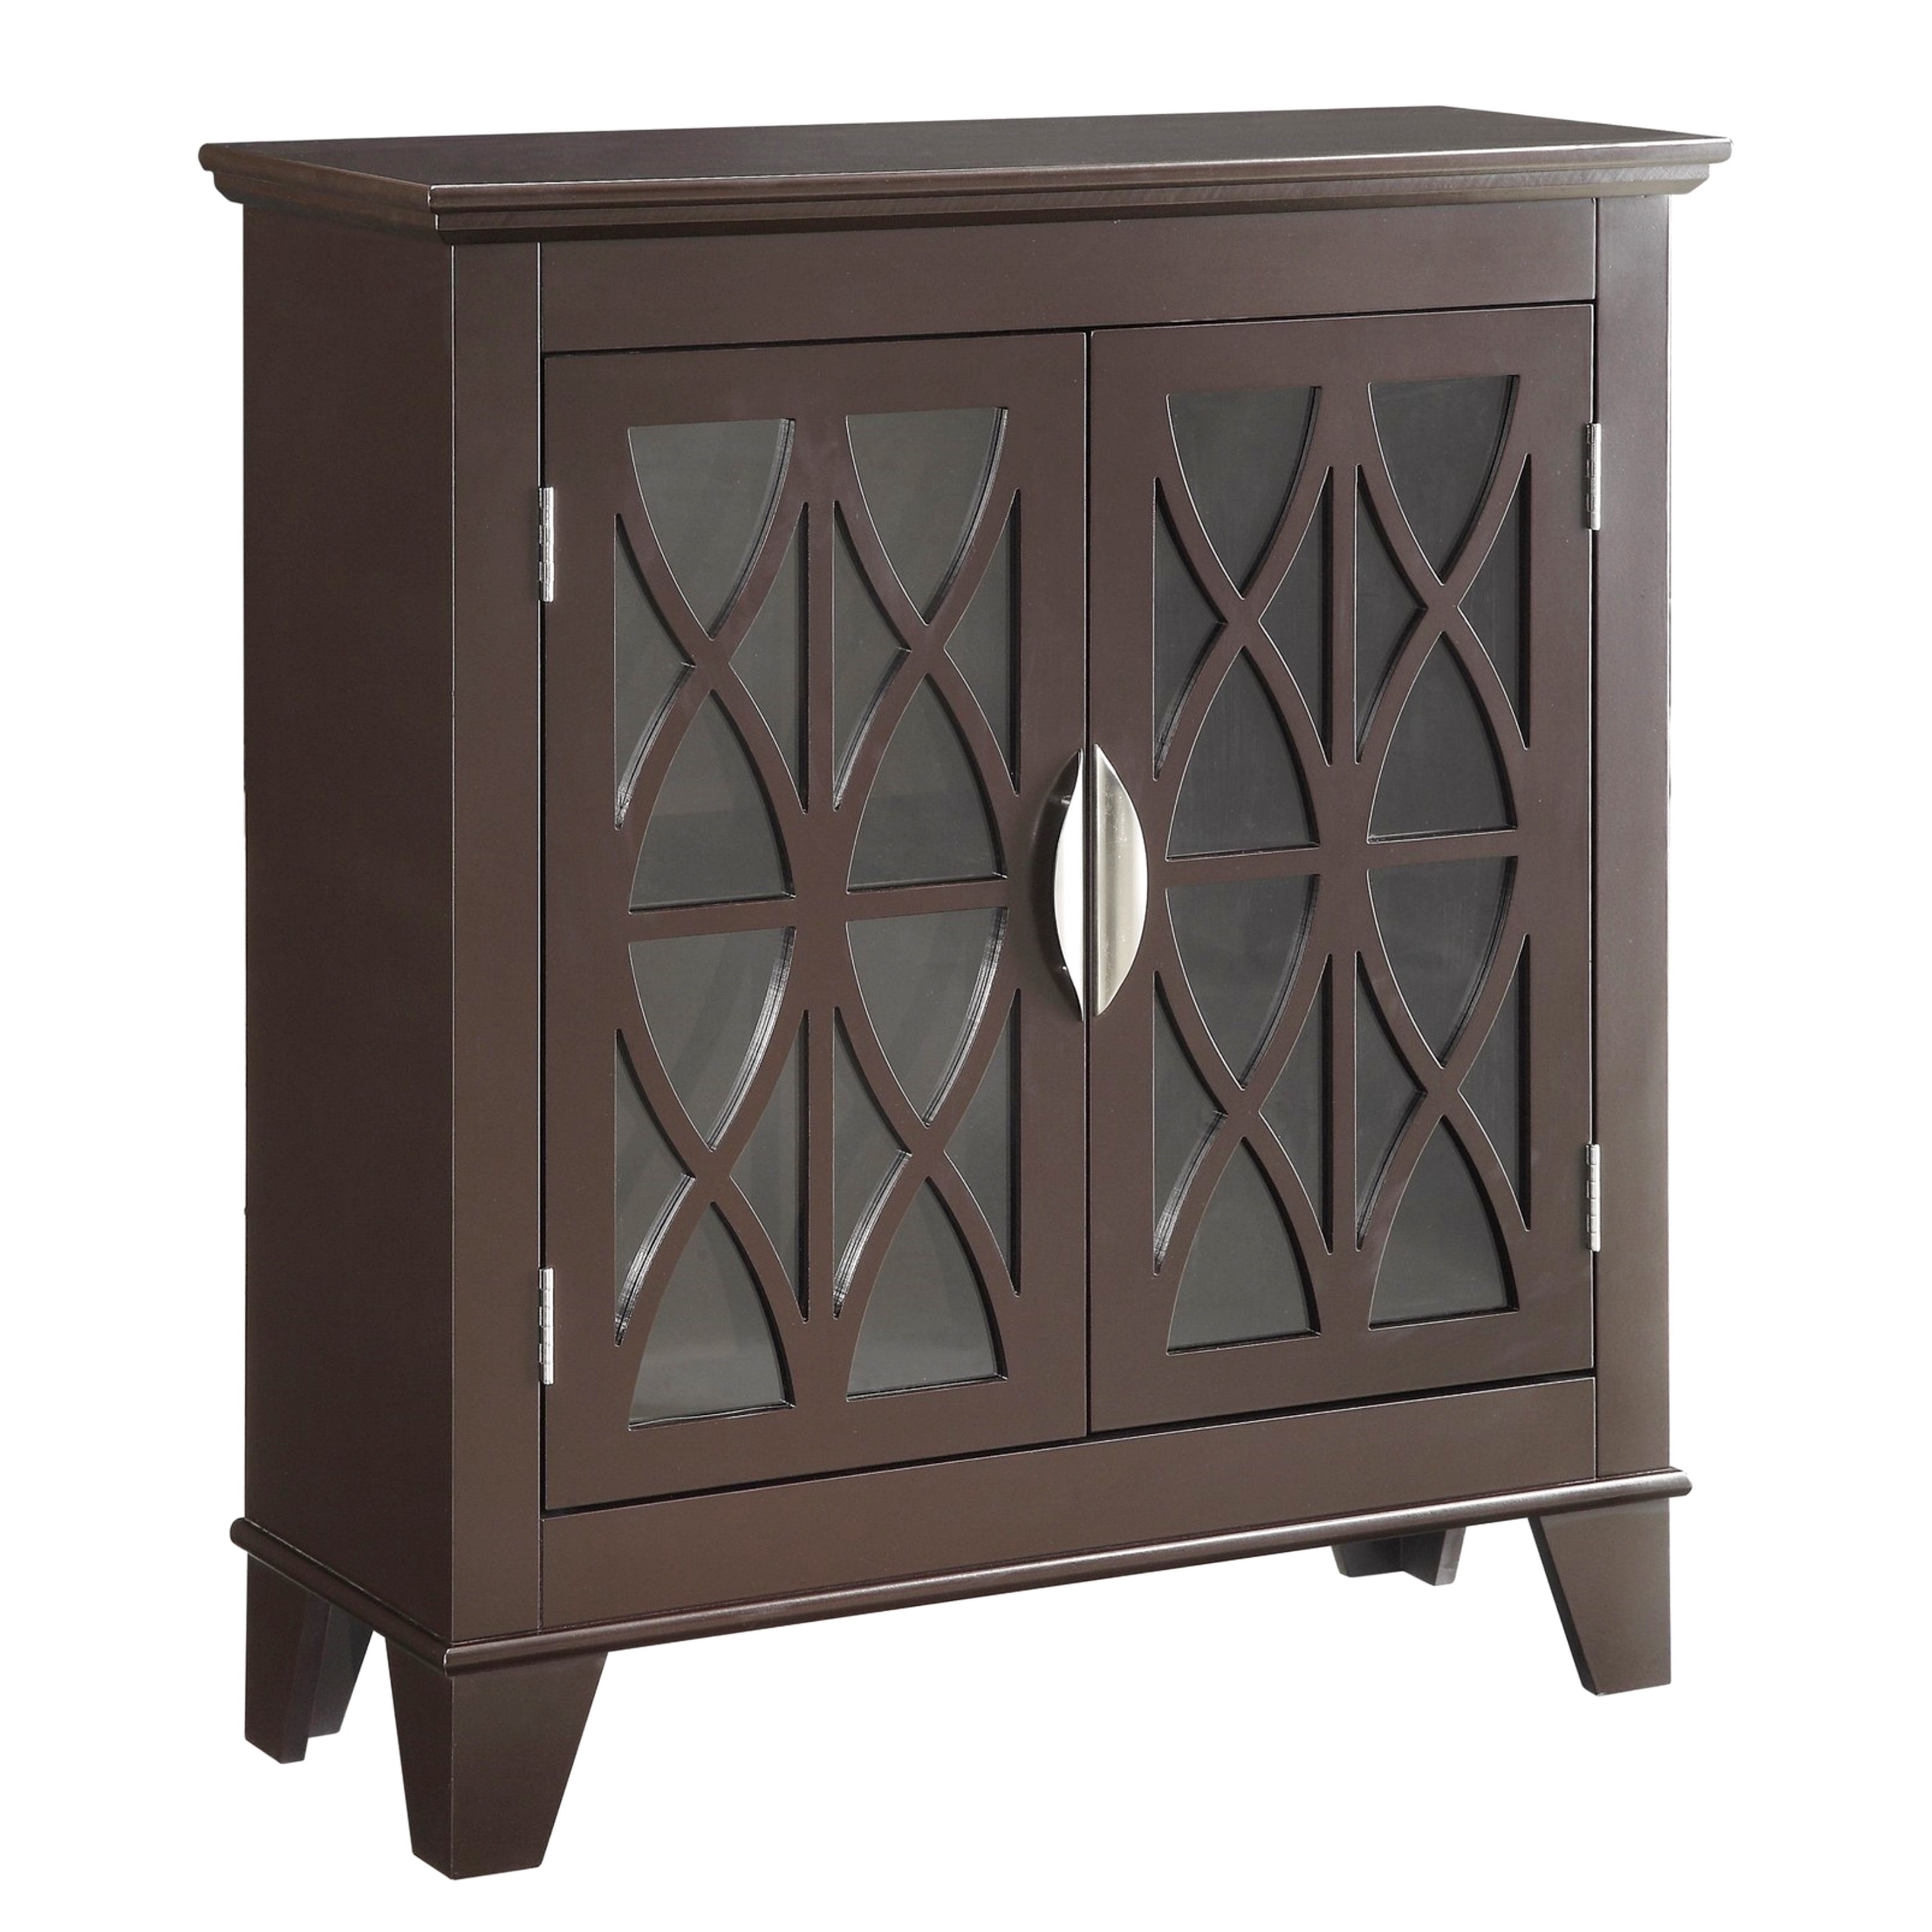 transitional design accent cabinet with decorative glass doors table free shipping today antique pedestal side entry decor black leather dining room chairs wood and metal round